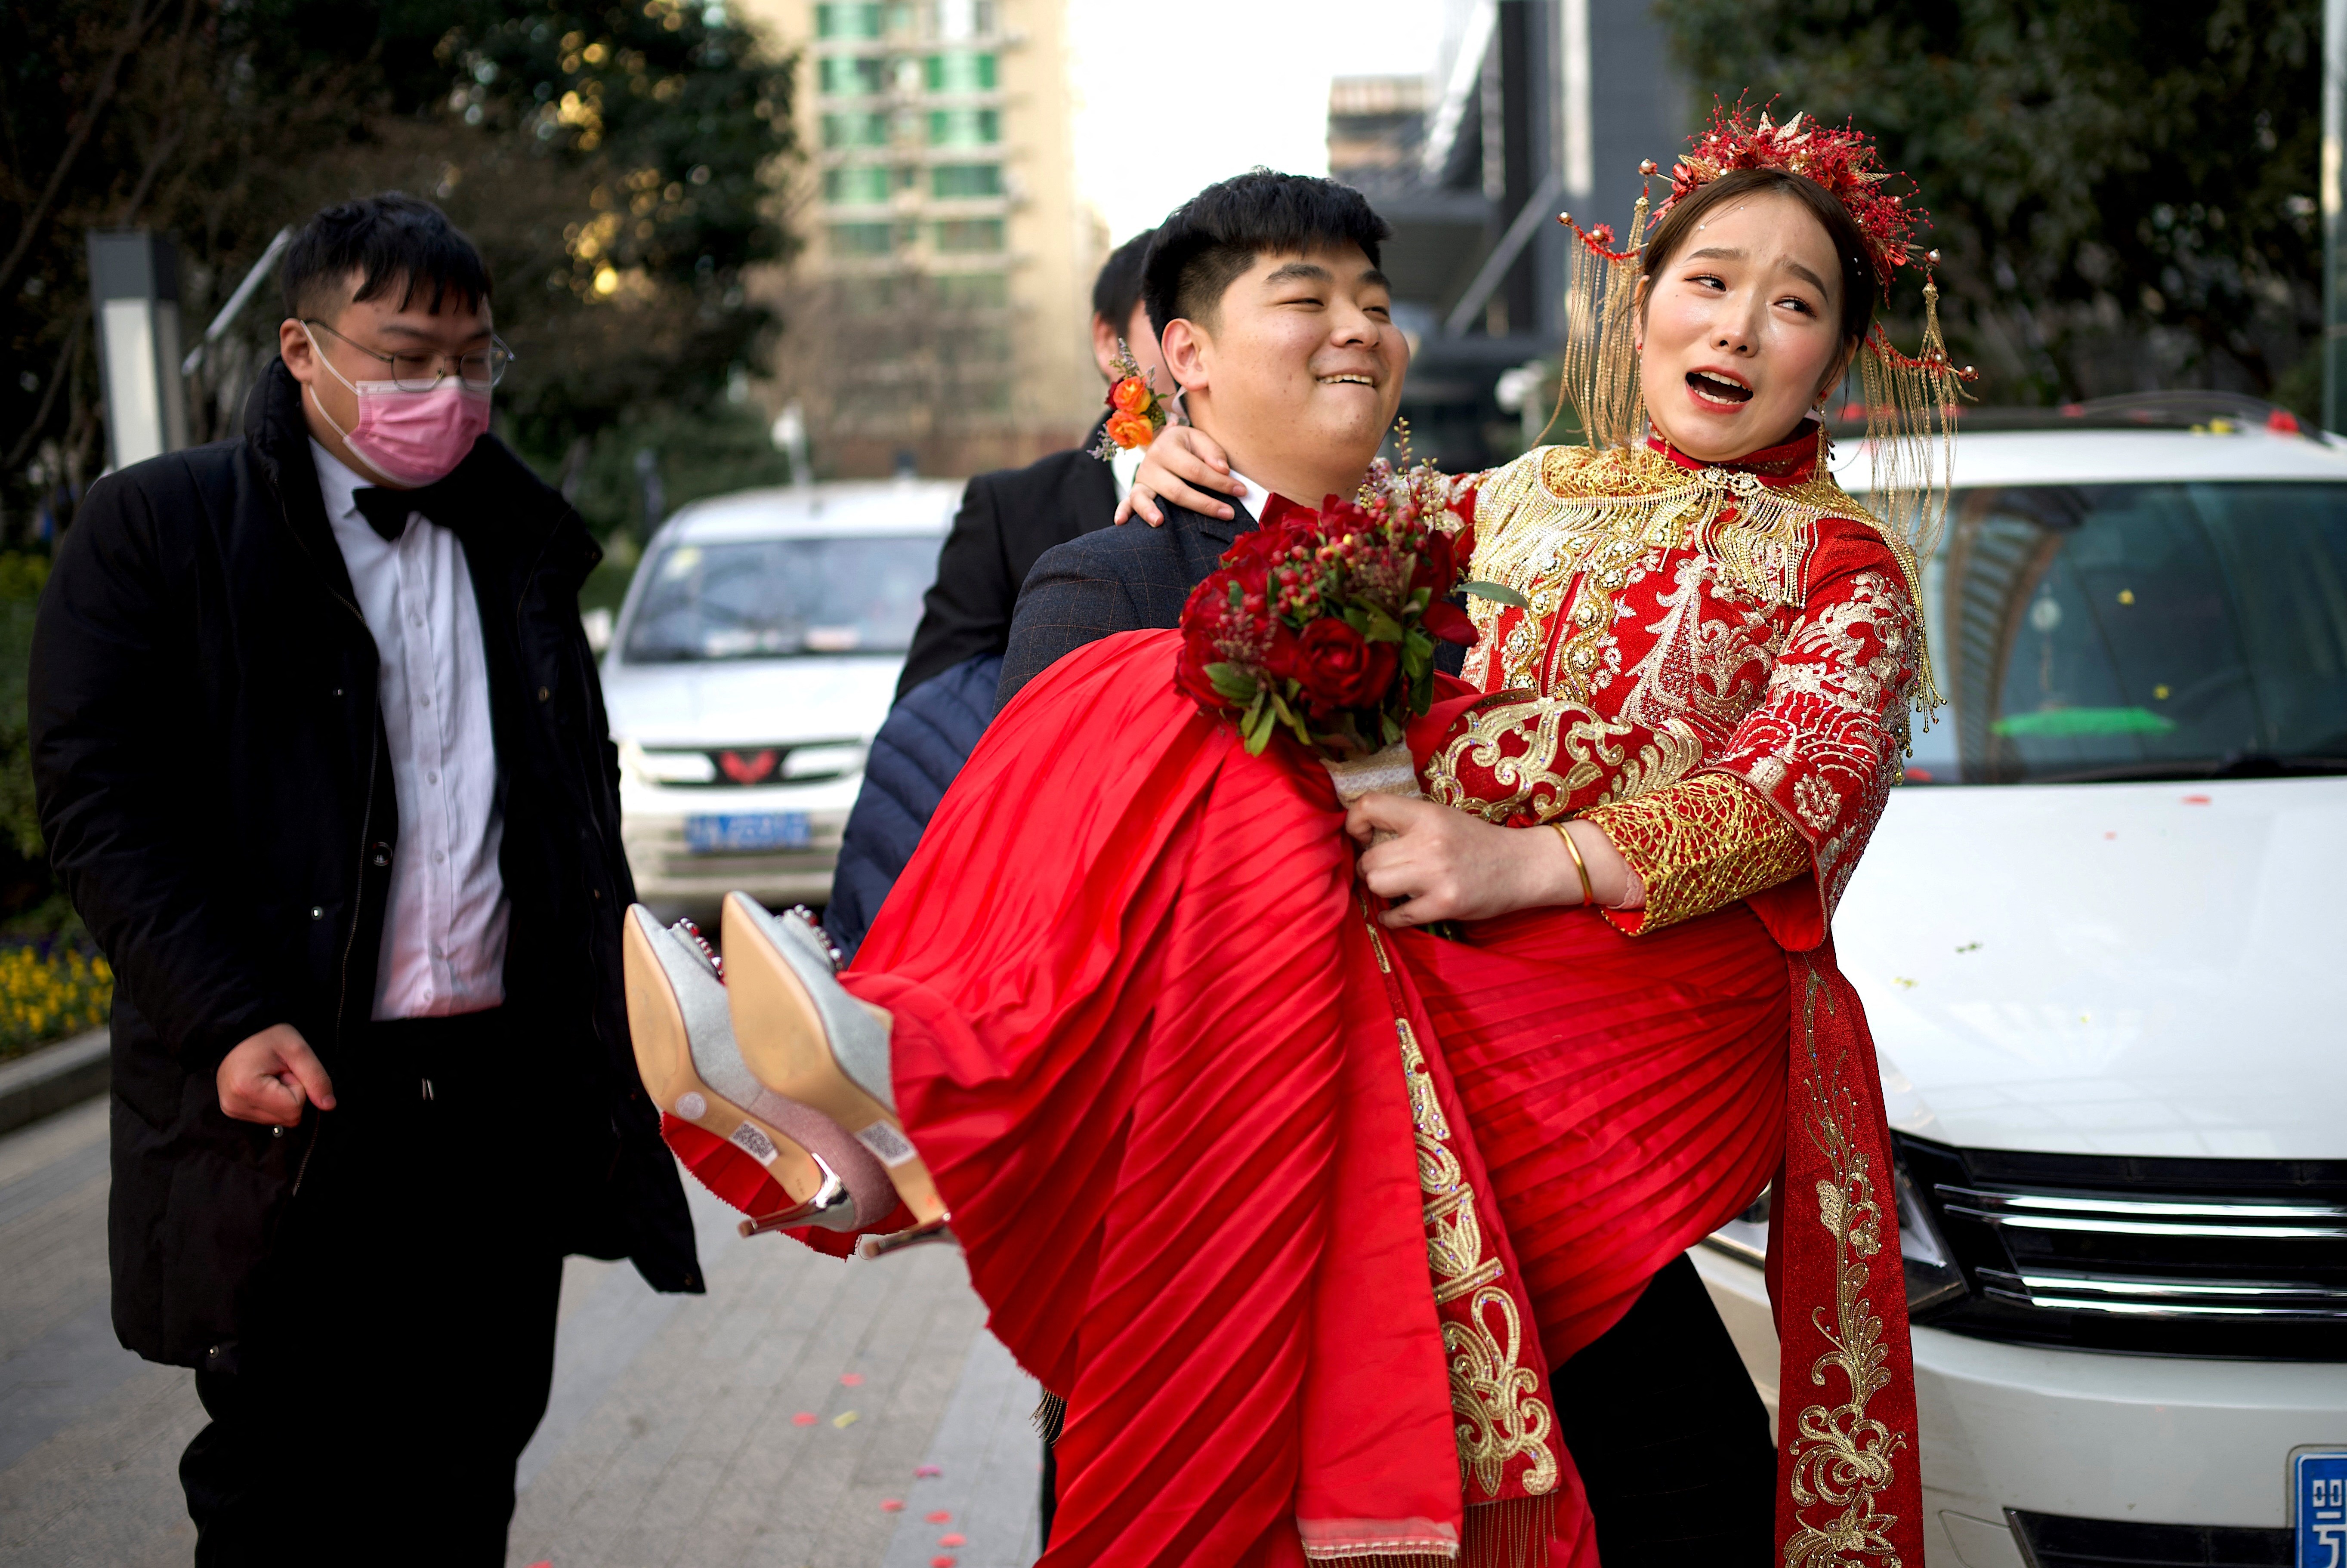 Why a Taiwanese Man Got Married 4 Times and Divorced 3 Times in 37 Days